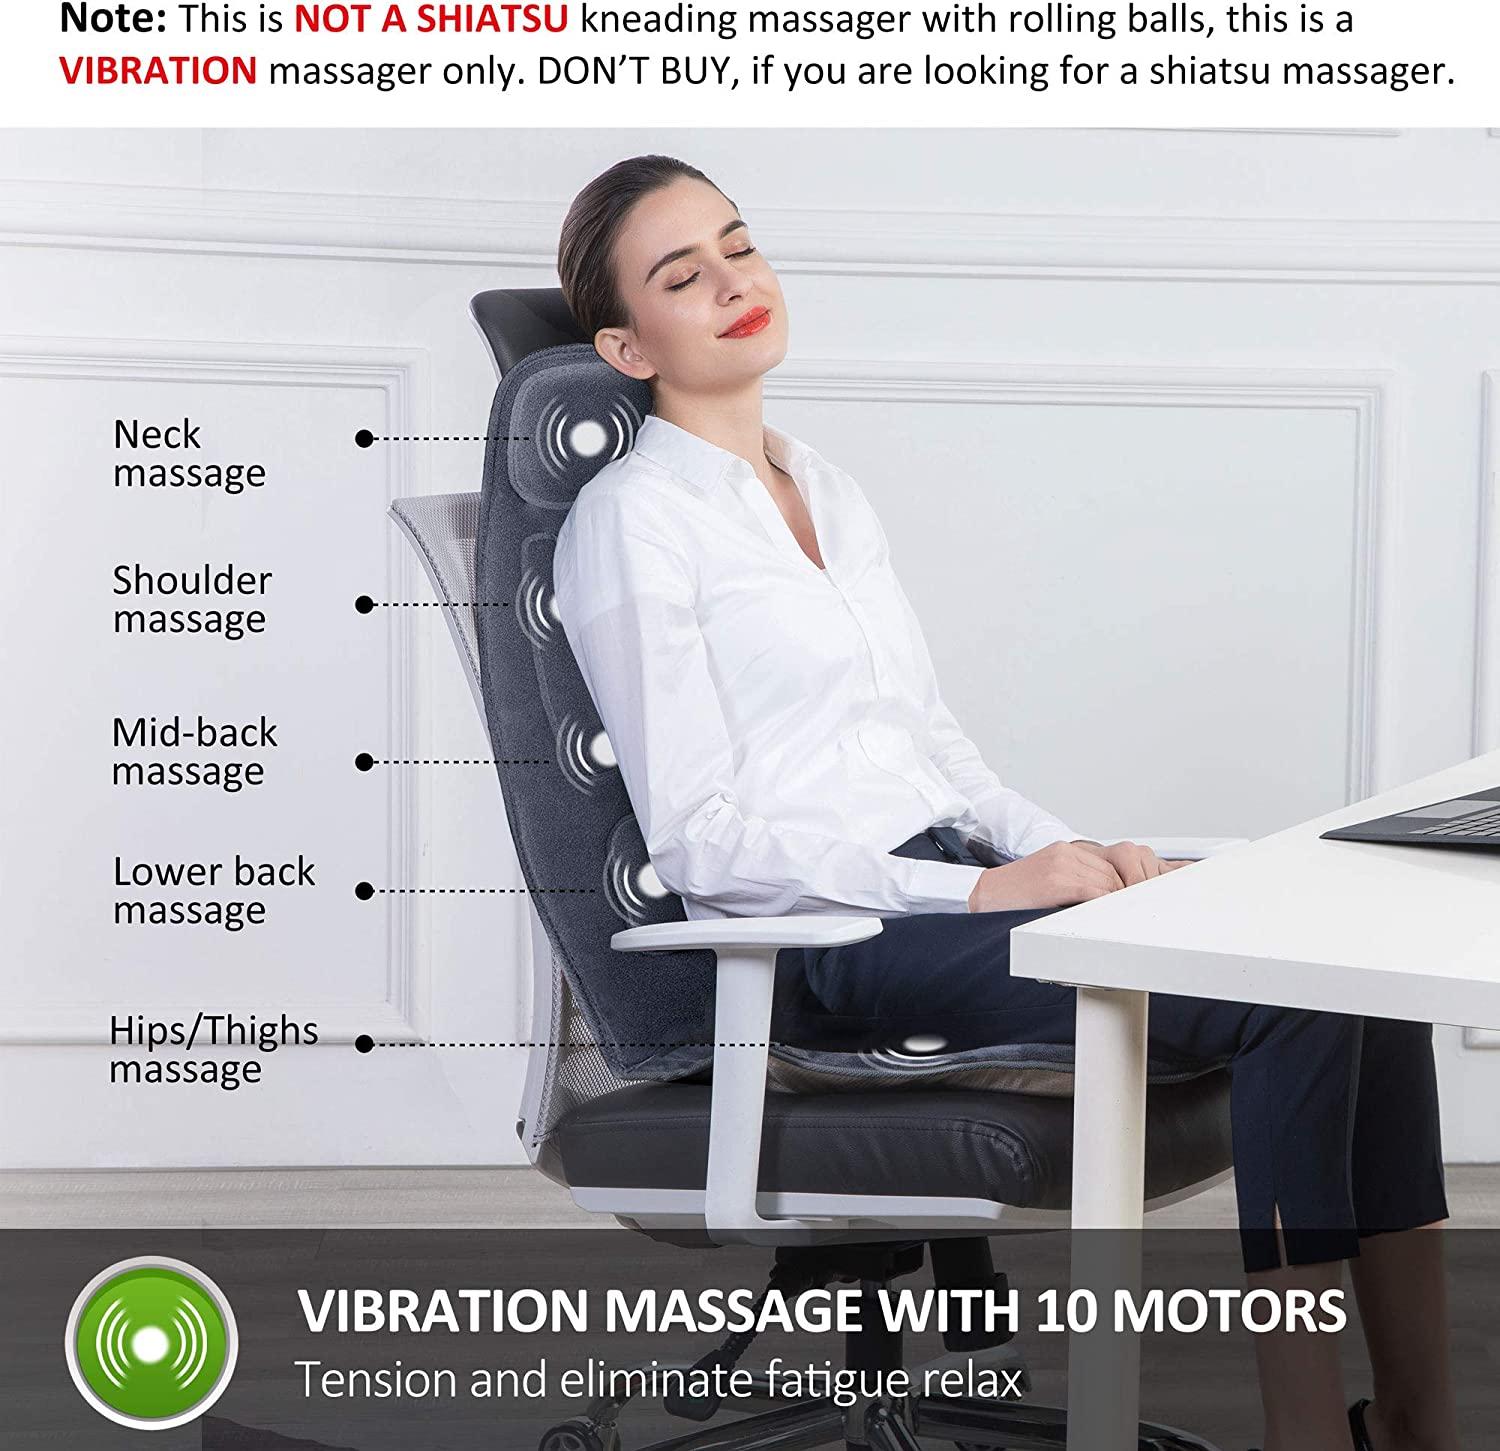 2 Back massagers heat & vibration For car or chair lumbar health touch Relax